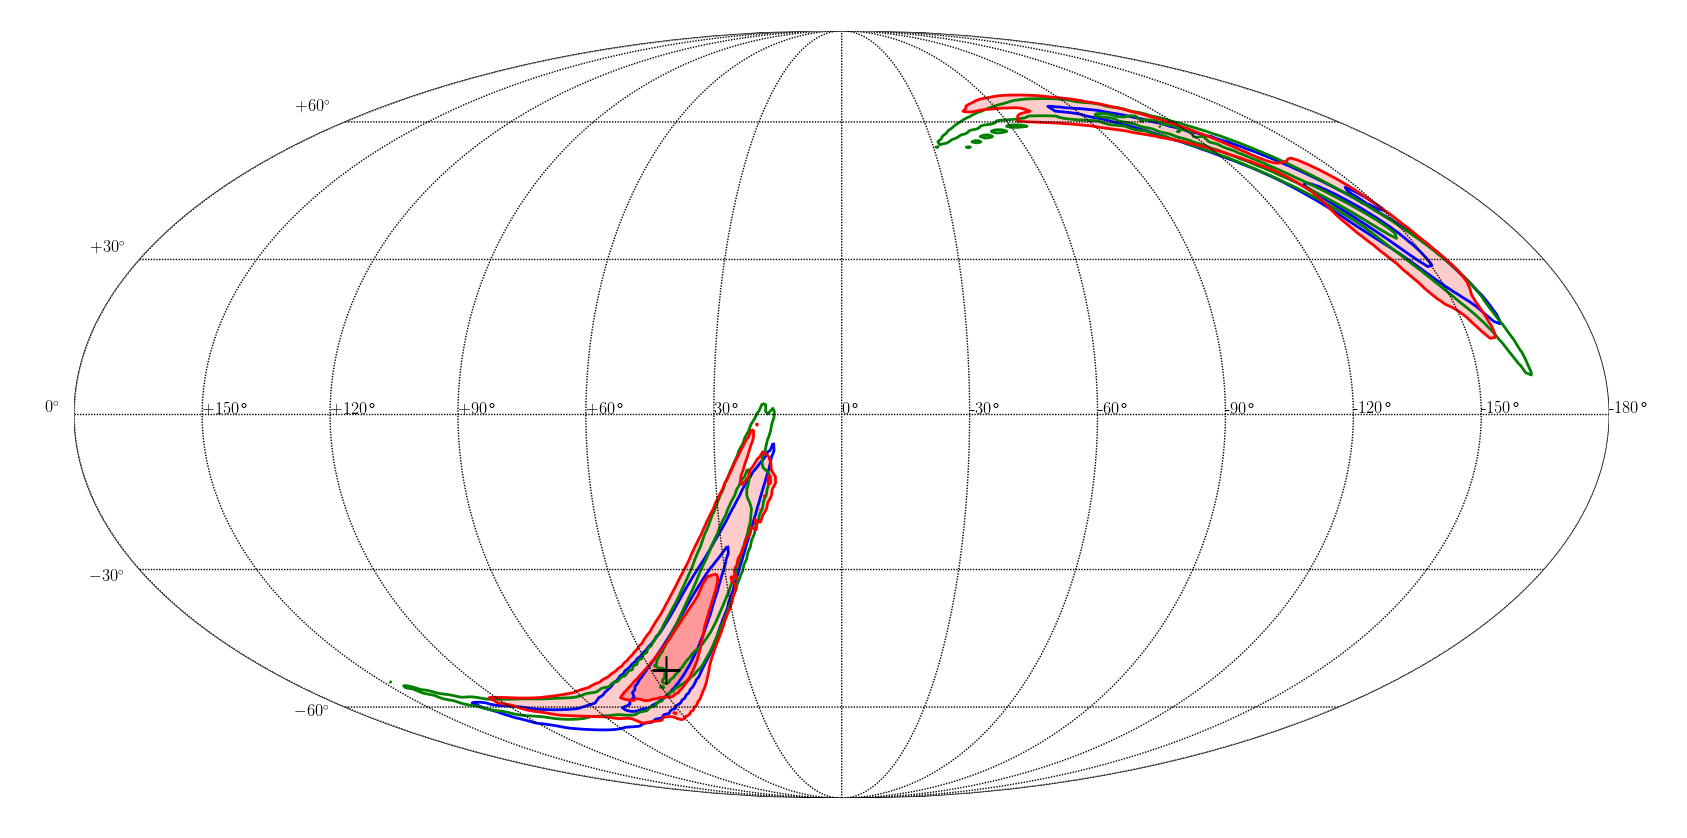 The plot shown illustrates predictions on the origin of a simulated gravitational wave signal with respect to a map of the sky. The prediction made by the team's AI approach is in red, while the predictions made by other standard approaches are in blue/green.